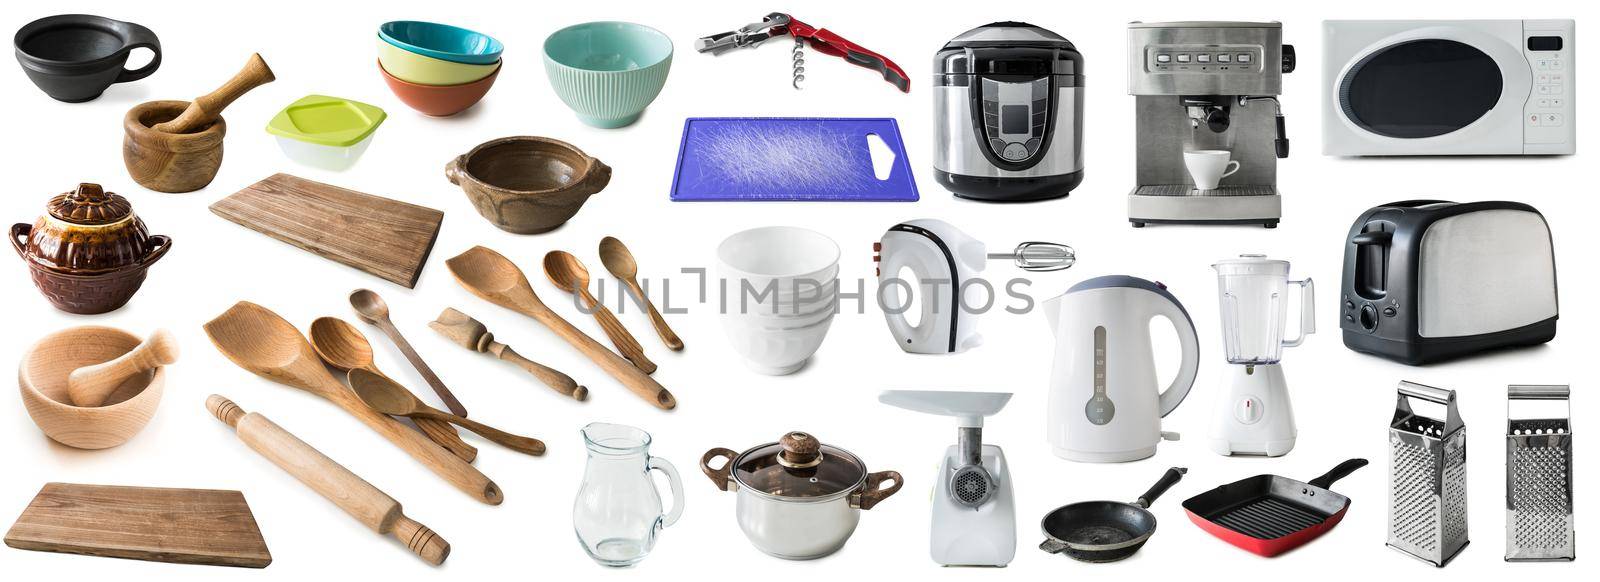 collage of many different kitchenware by tan4ikk1